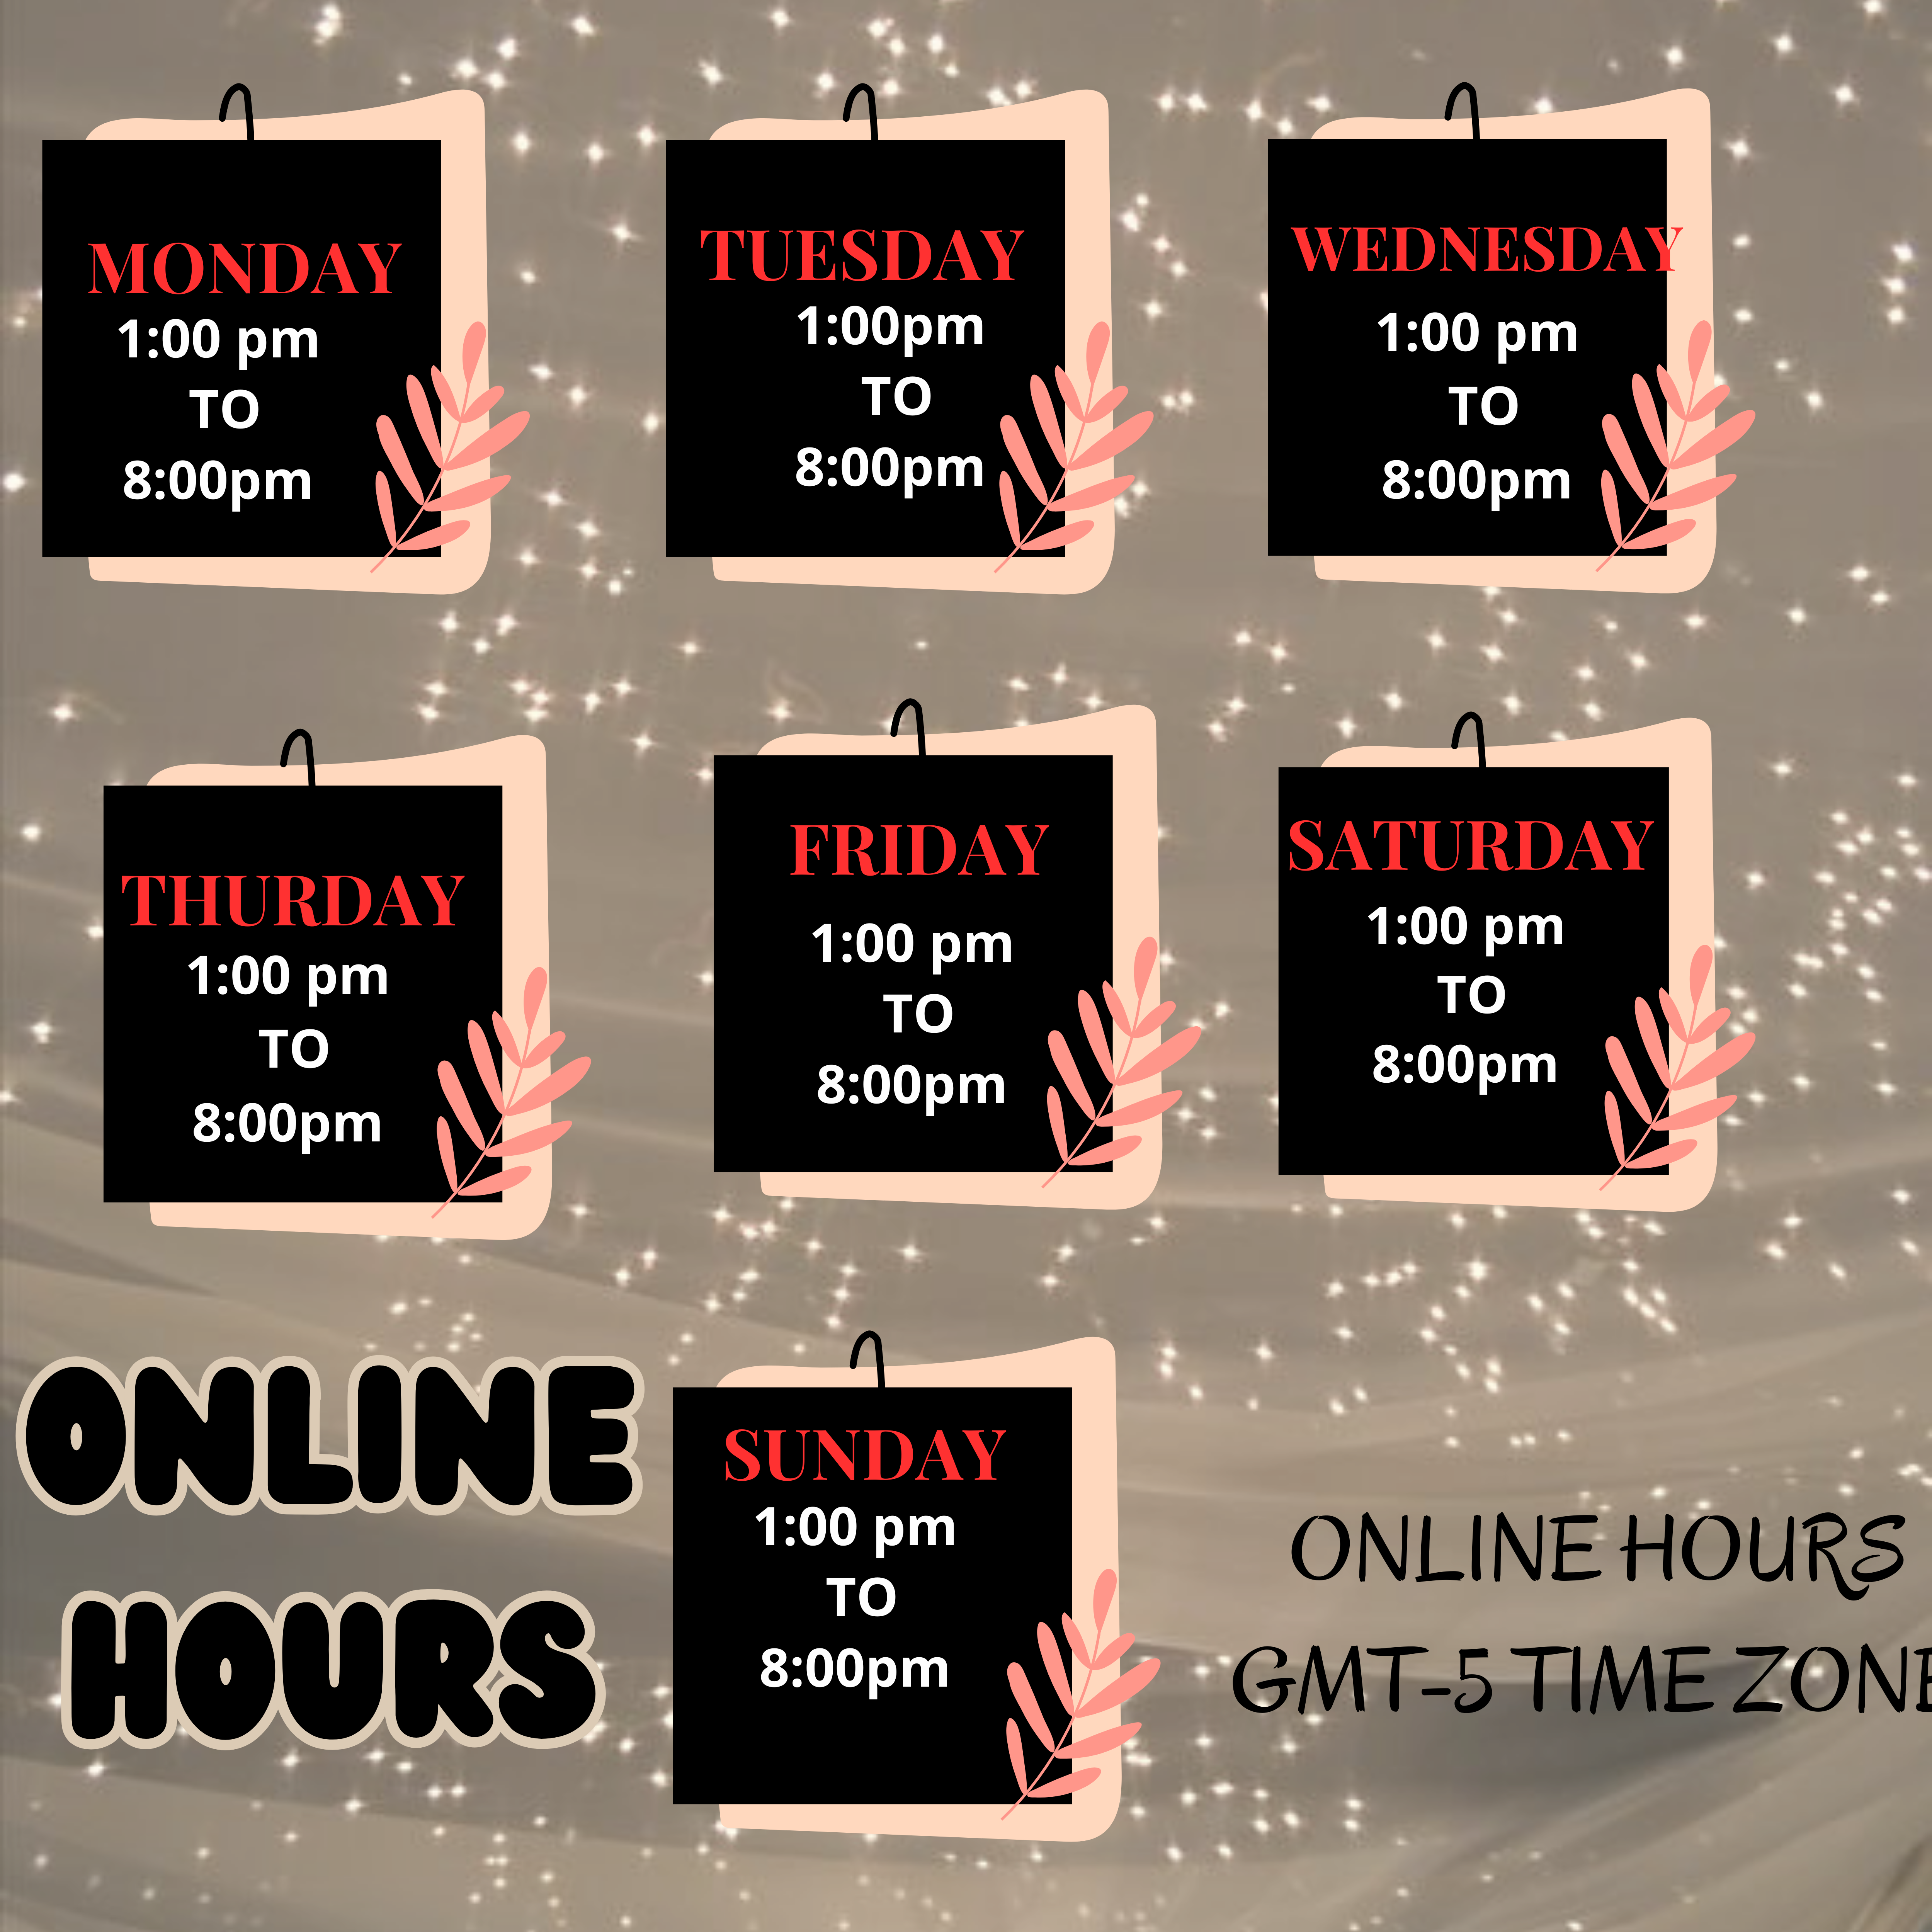 -liss05 online hours image: 1